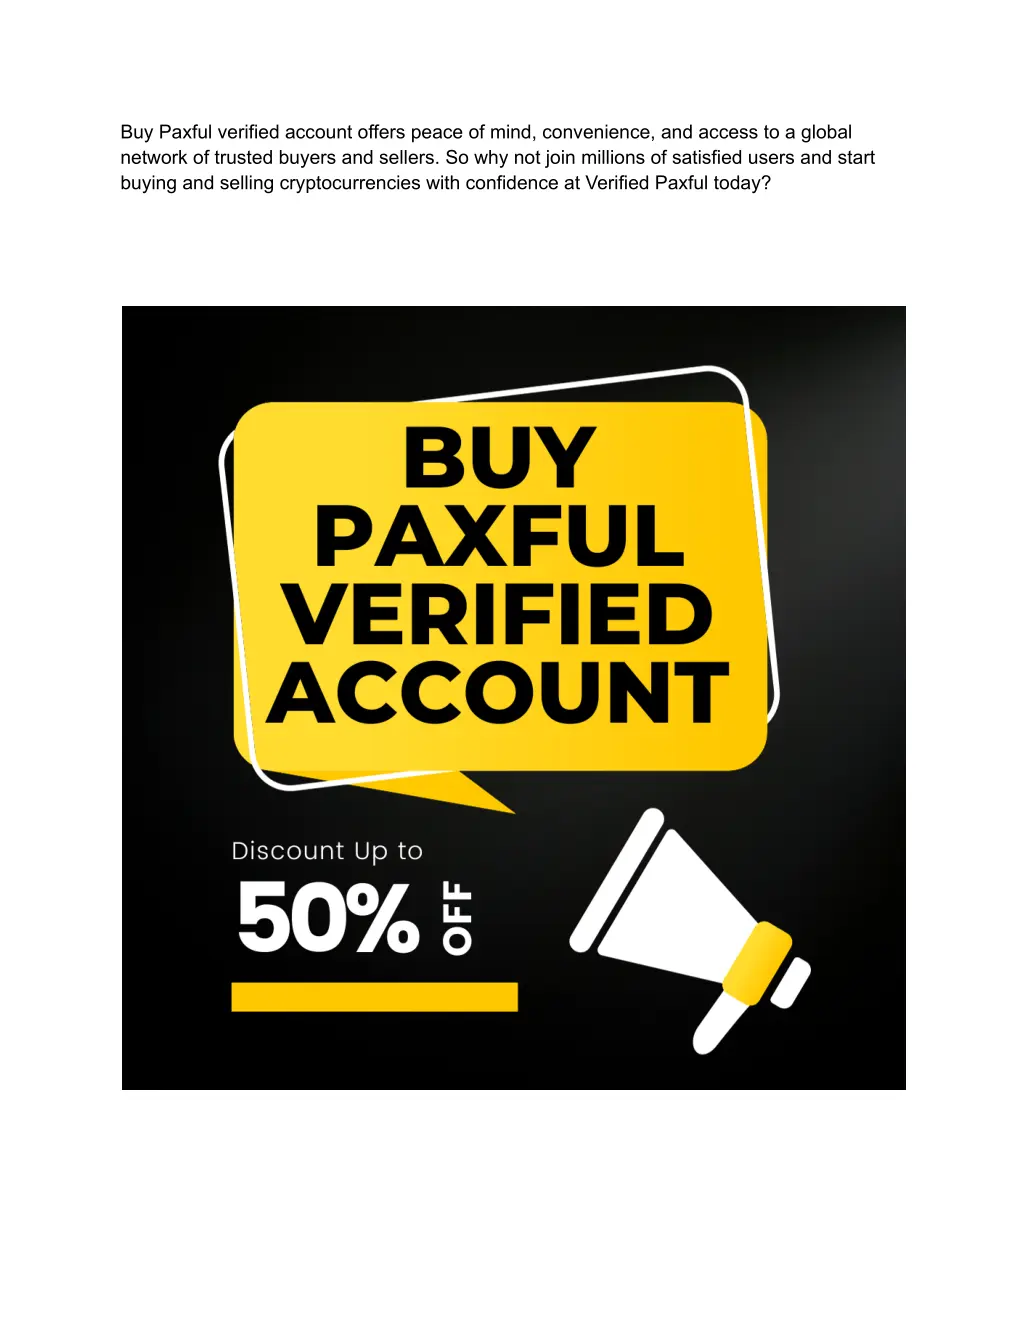 buy paxful verified account offers peace of mind